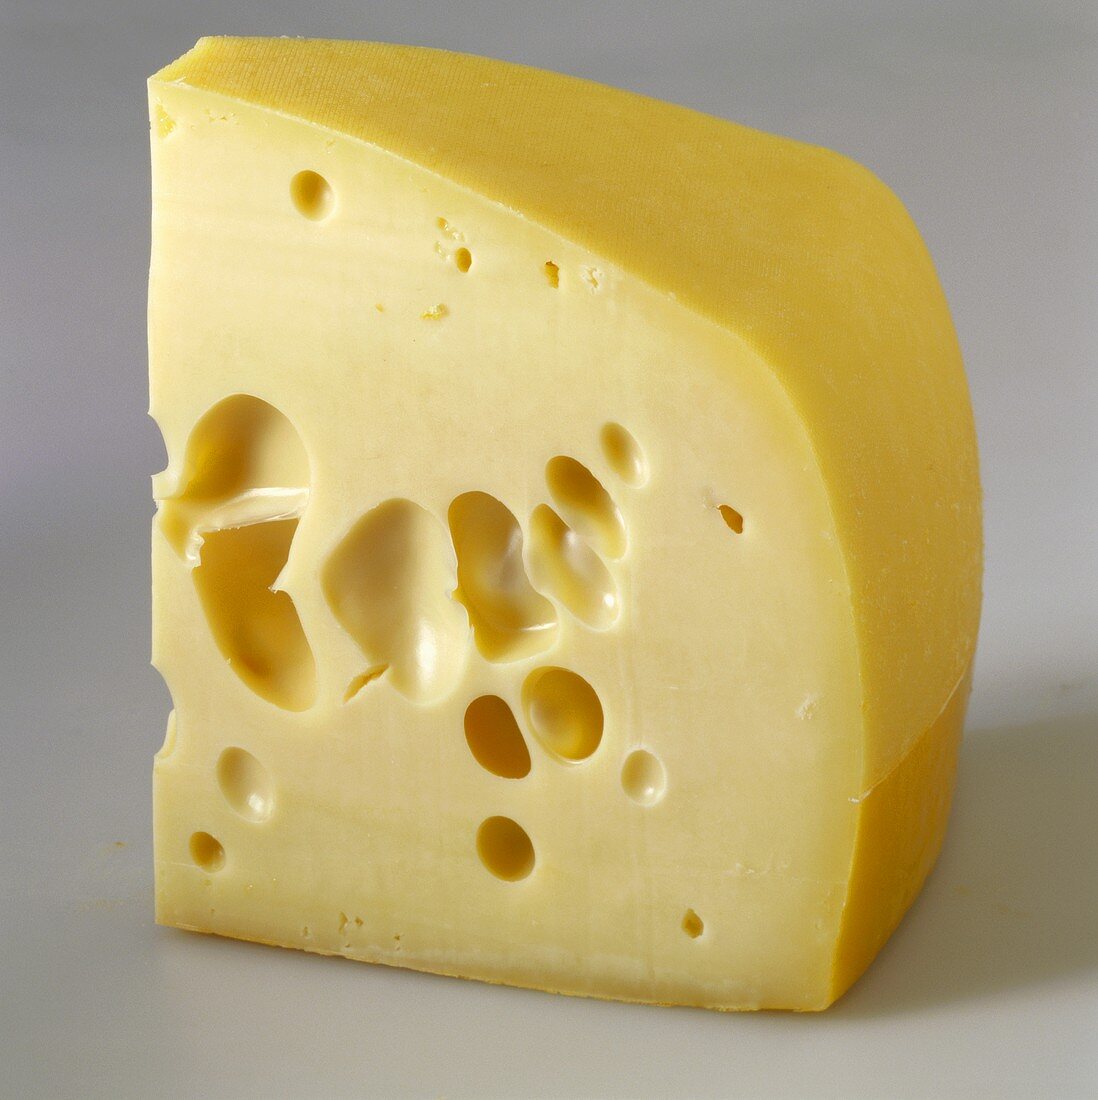 A piece of Westberg cheese